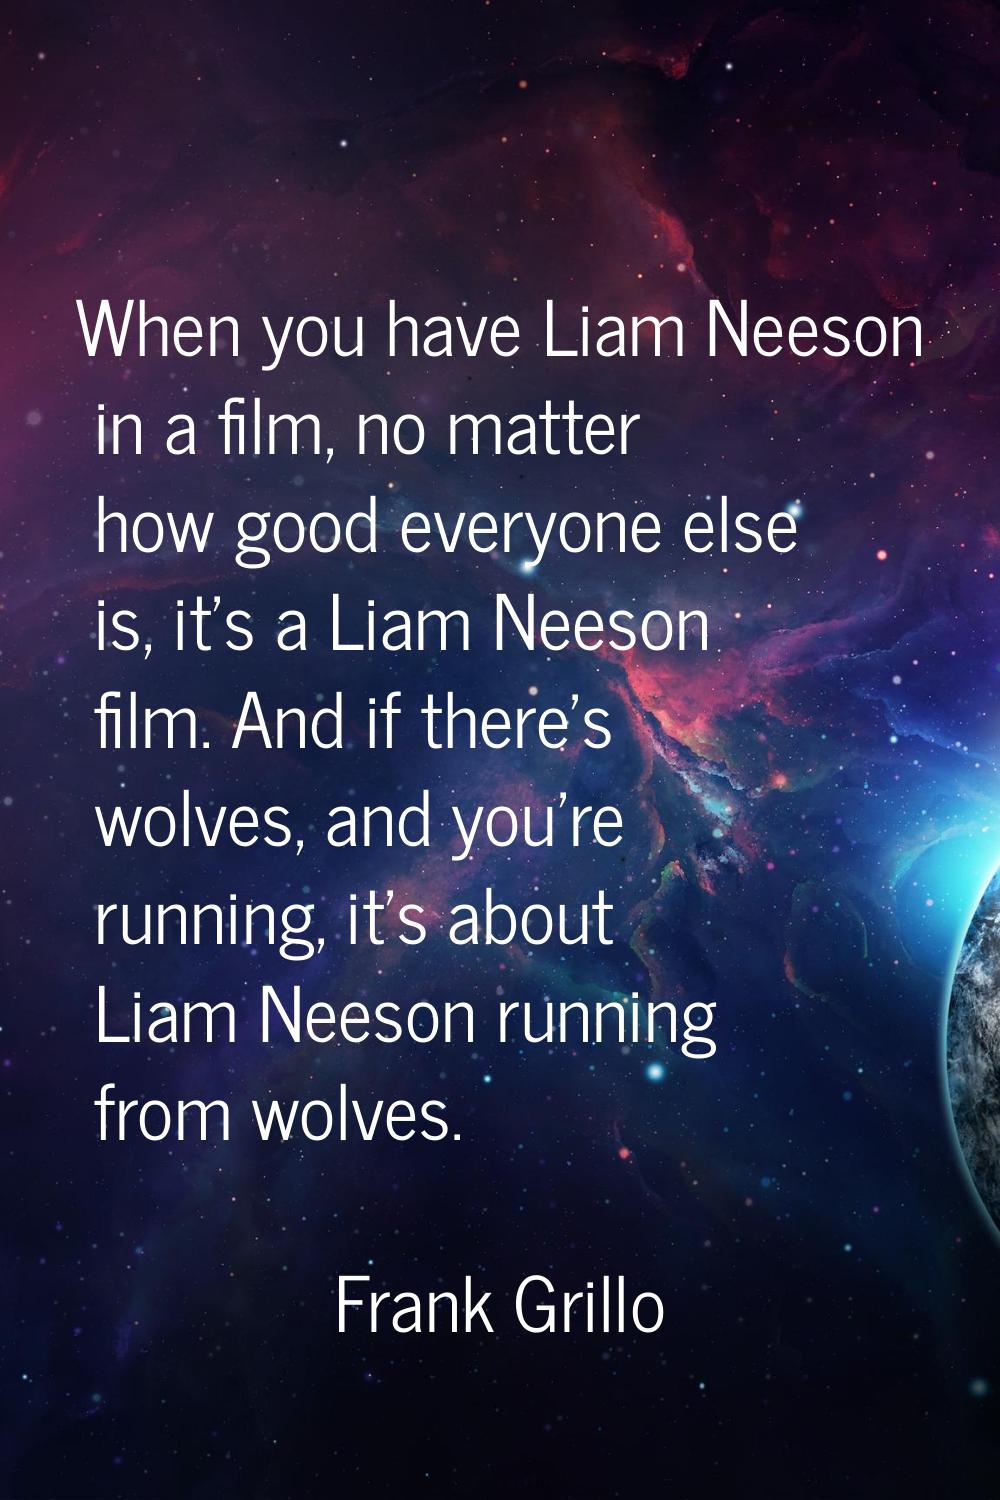 When you have Liam Neeson in a film, no matter how good everyone else is, it's a Liam Neeson film. 